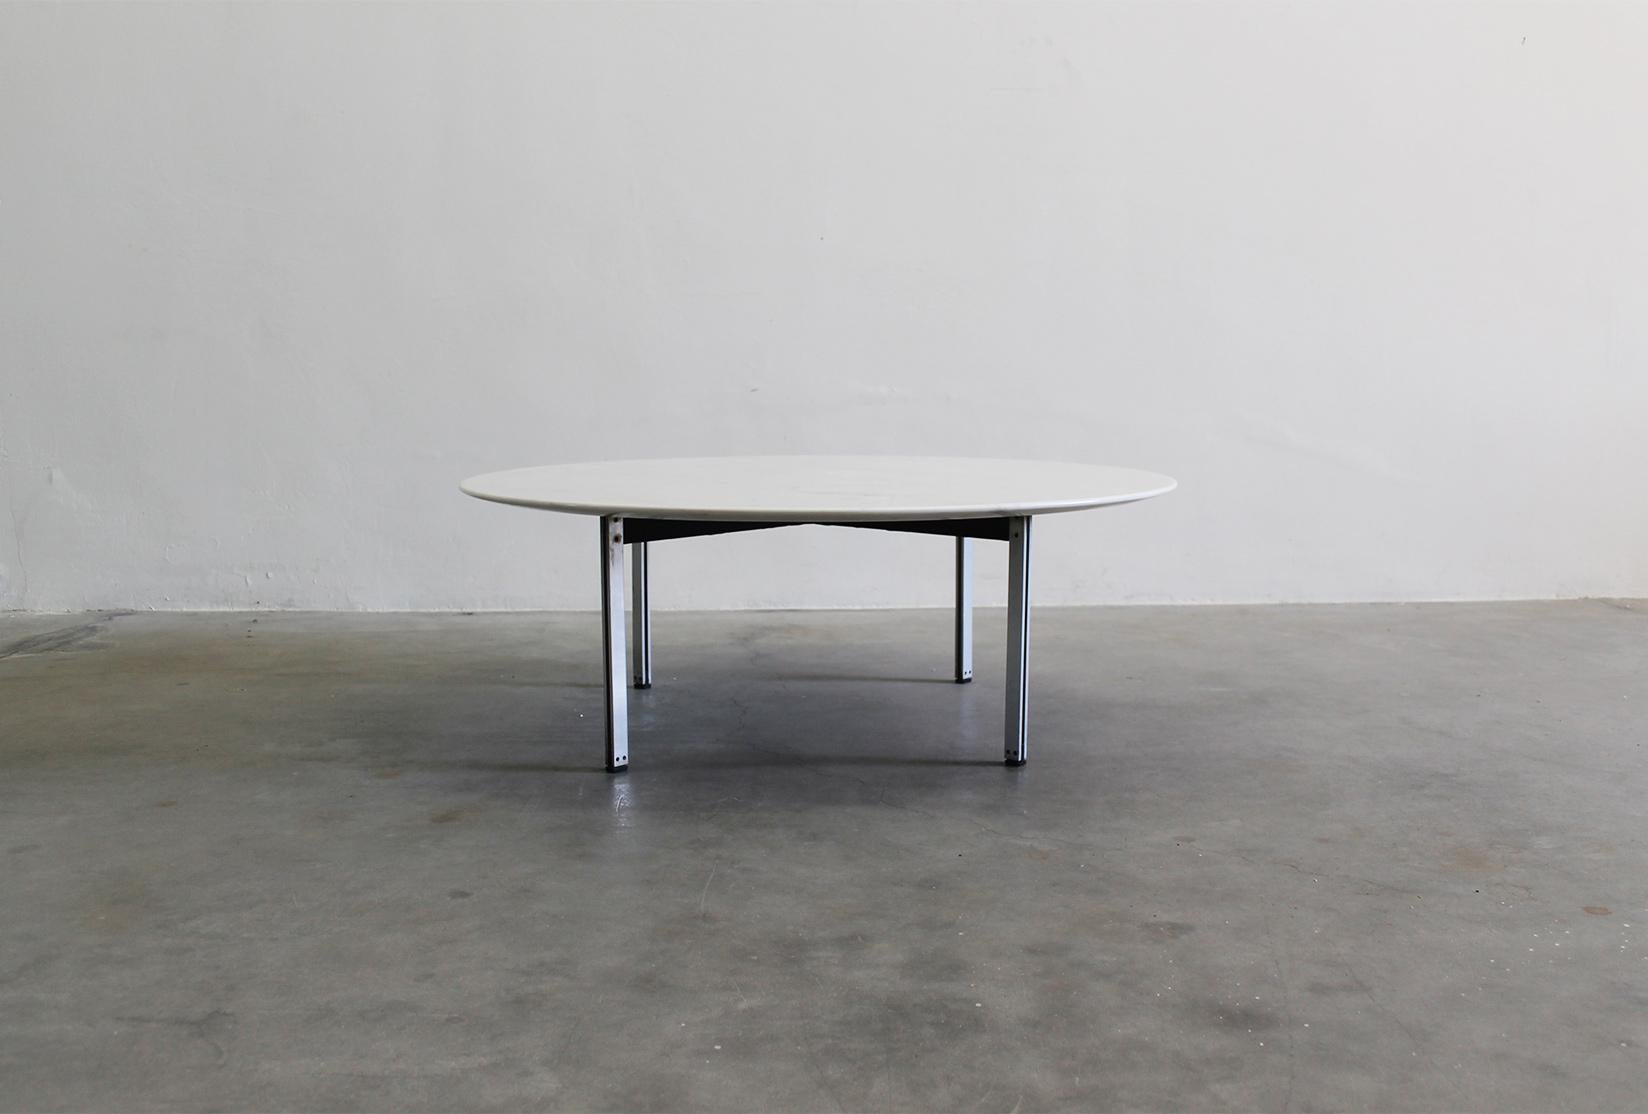 Low table with a round-shaped table top in white marble and four metal legs from the Parallel Bar series, designed by Florence Knoll and manufactured by Knoll International during the 1950s. 

Born to a baker, and orphaned at age twelve, Florence